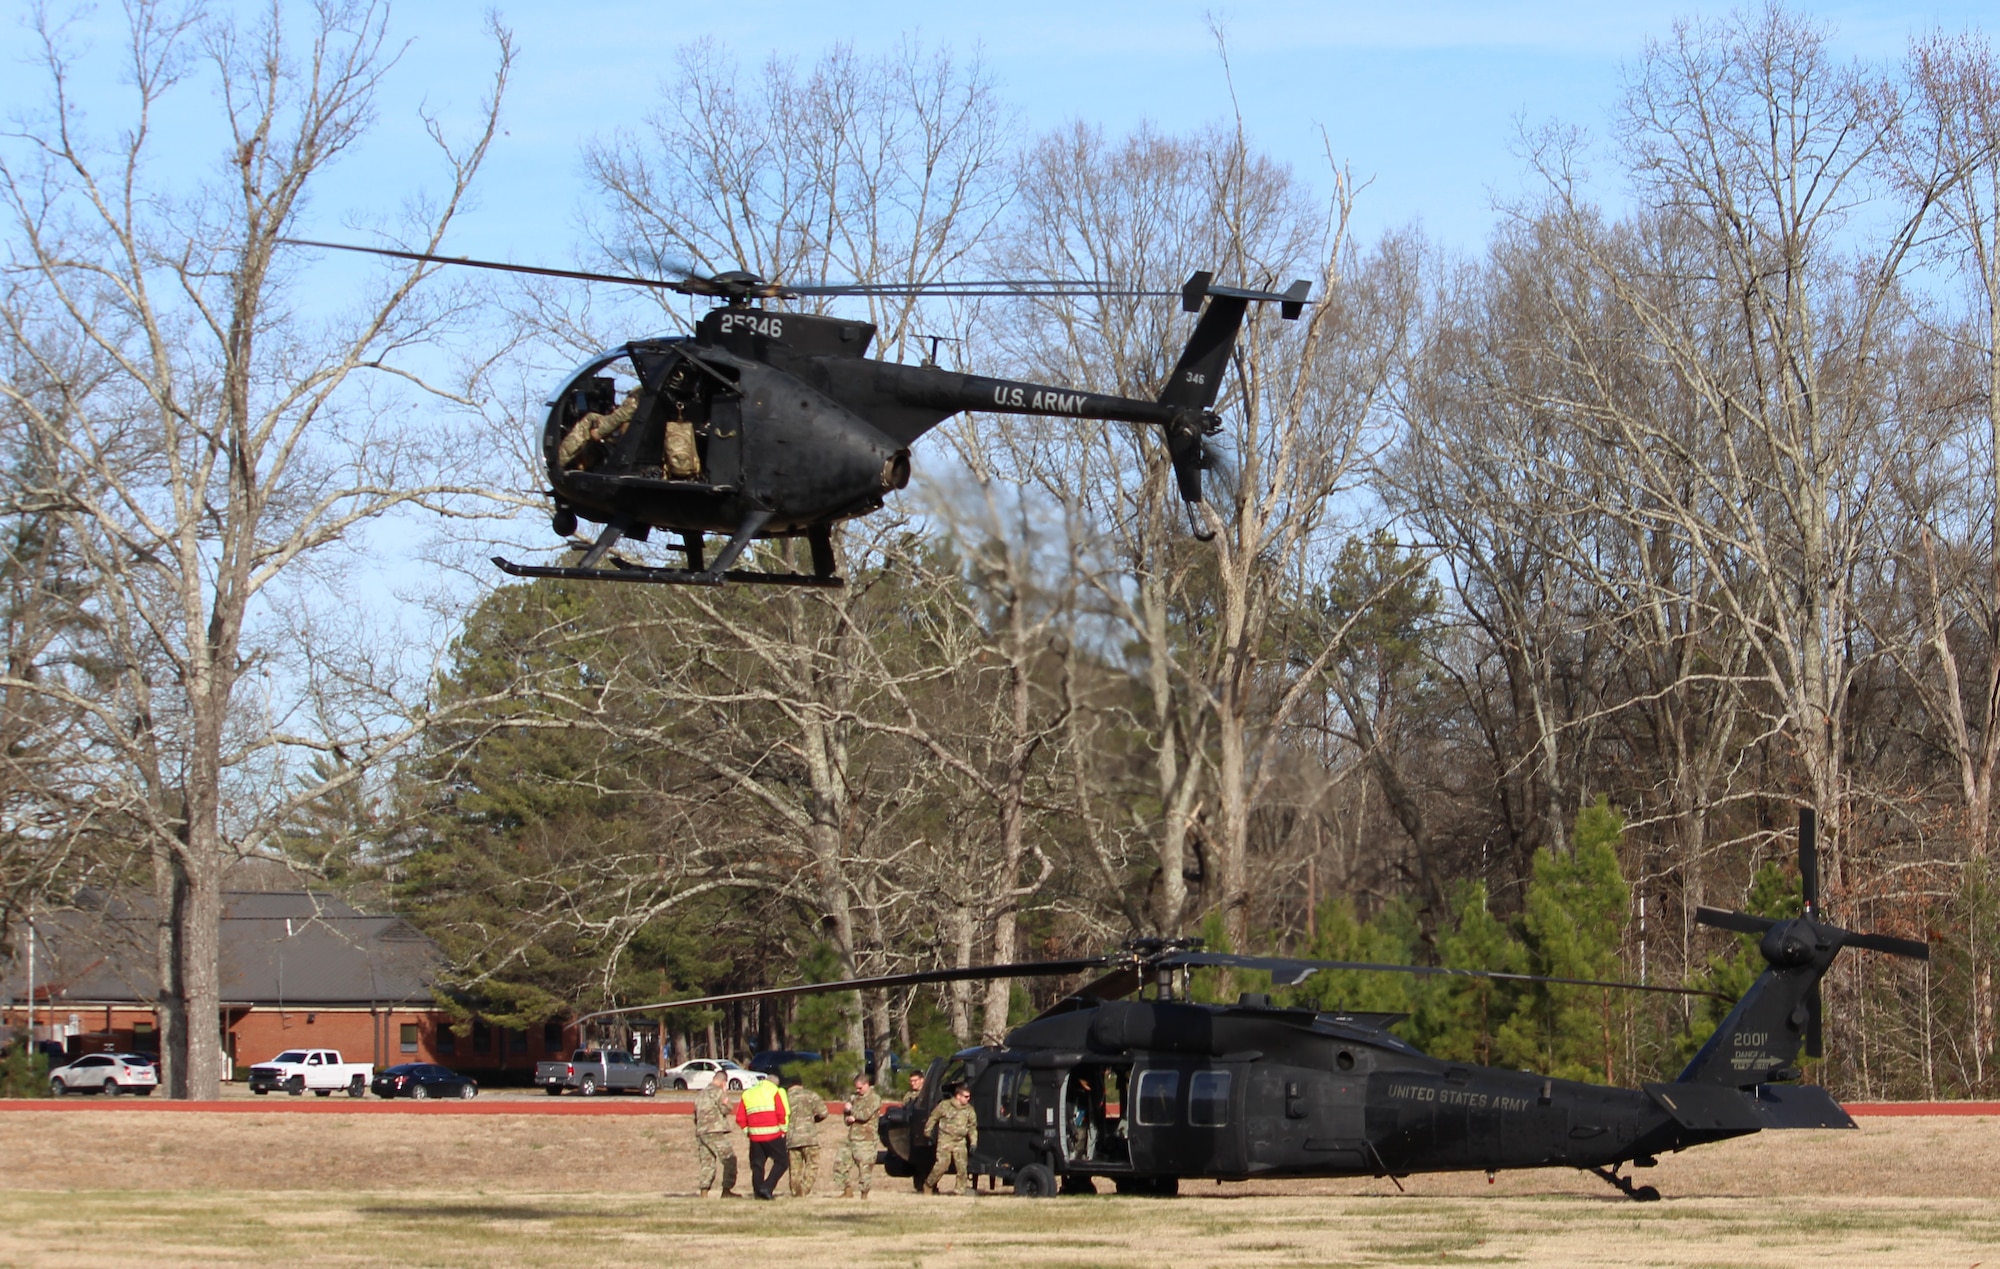 Arnold Air Force Base Fire and Emergency Services personnel receive training Dec. 20, 2019, to become familiar with the working parts of different military helicopters, from members of U.S. Army units based at Fort Campbell, Kentucky. (U.S. Air Force photo by Deidre Moon)